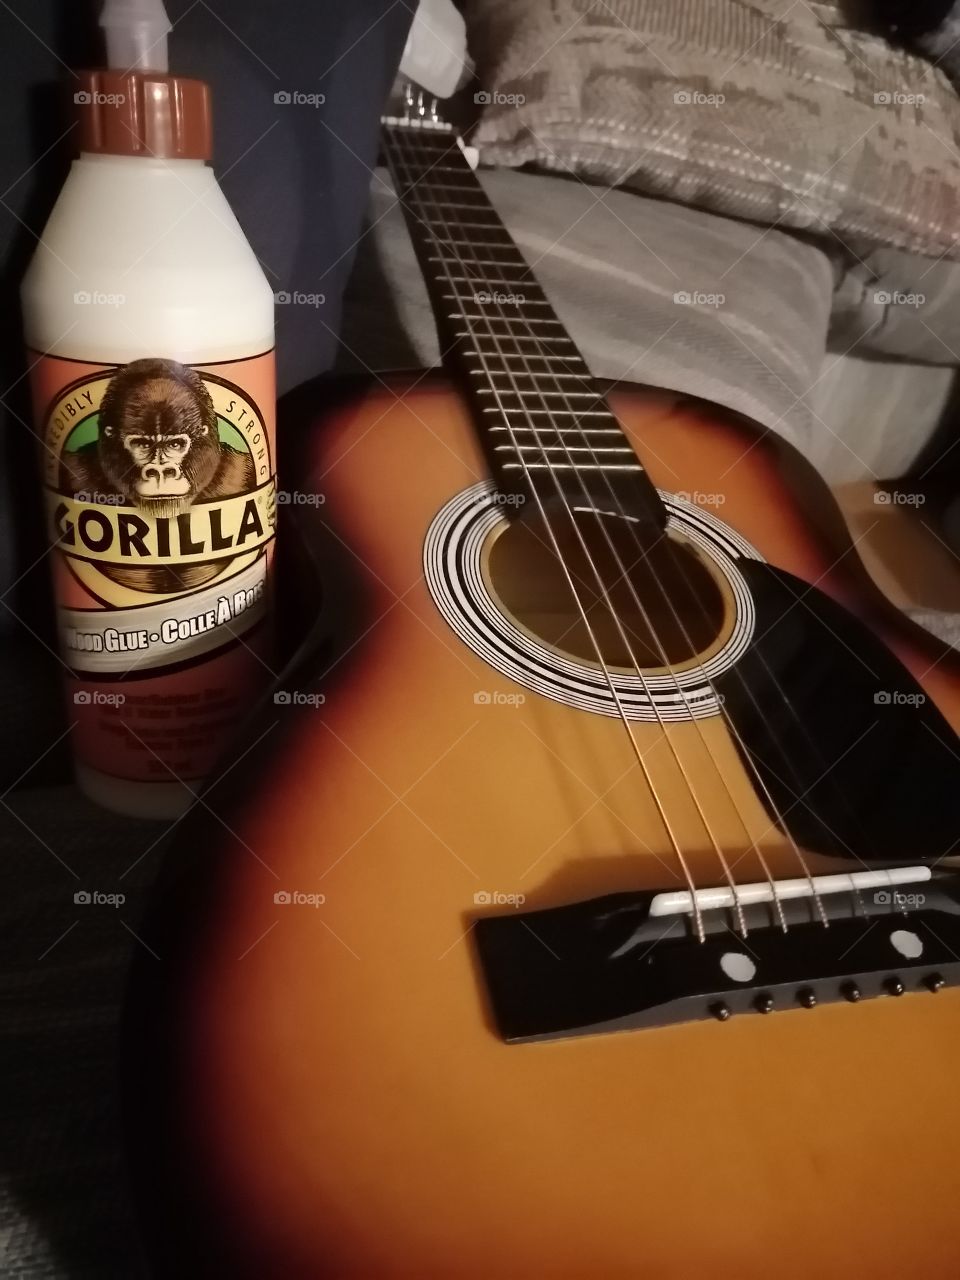 gorilla wood glue I used to fix my guitar it works like a charm this guitar is not very good but gorilla glue holds Robson guitar